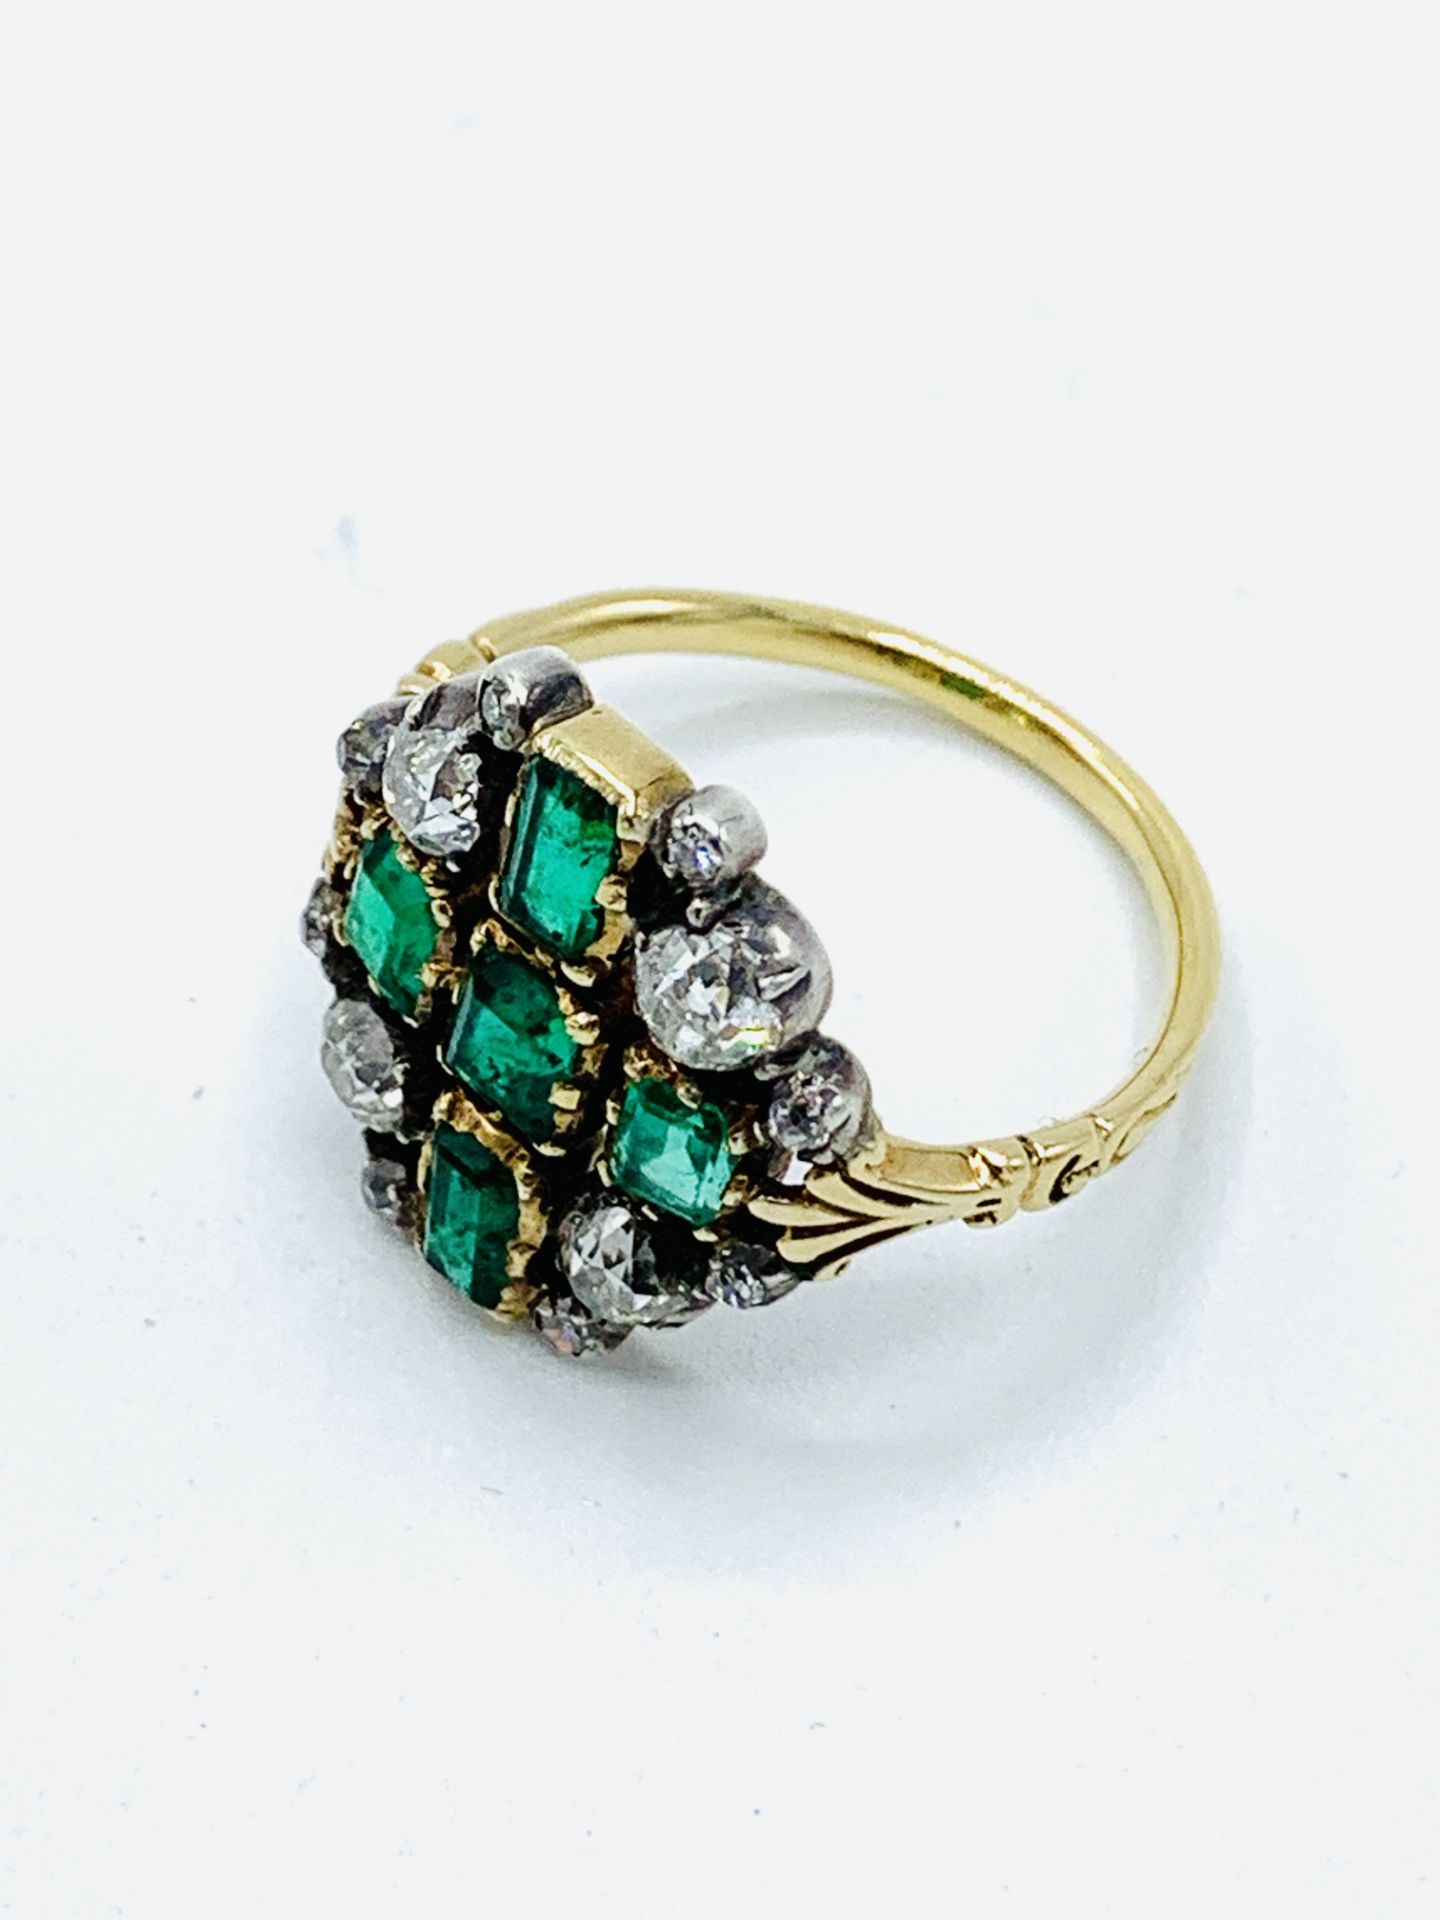 Yellow gold emerald and diamond ring - Image 4 of 5